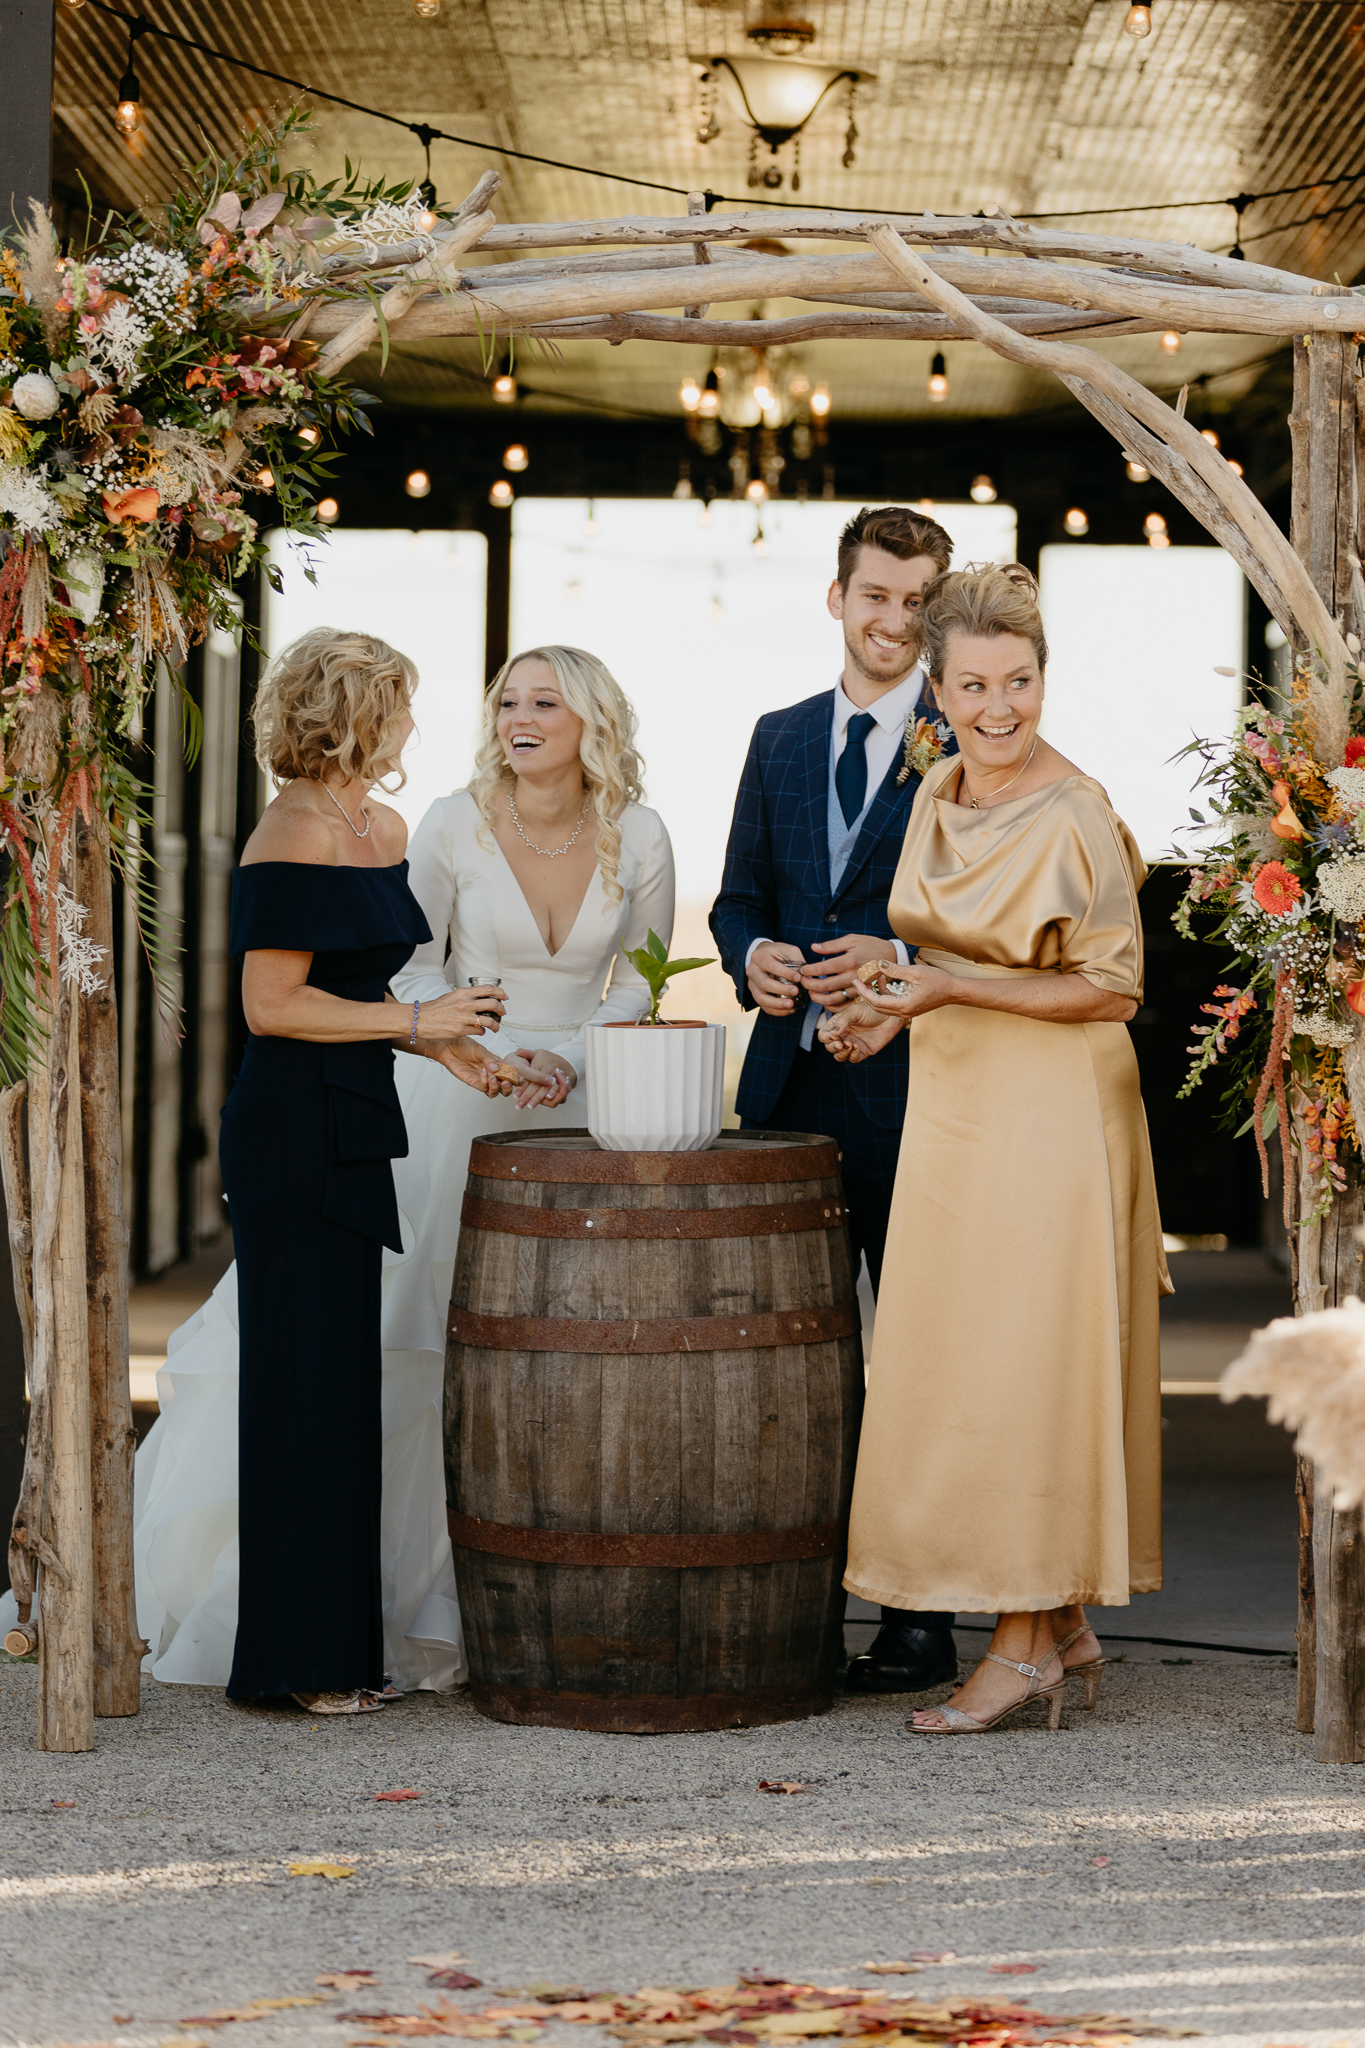 Bride, Groom, and mothers pour soil into a plant at the altar of an outdoor wedding ceremony